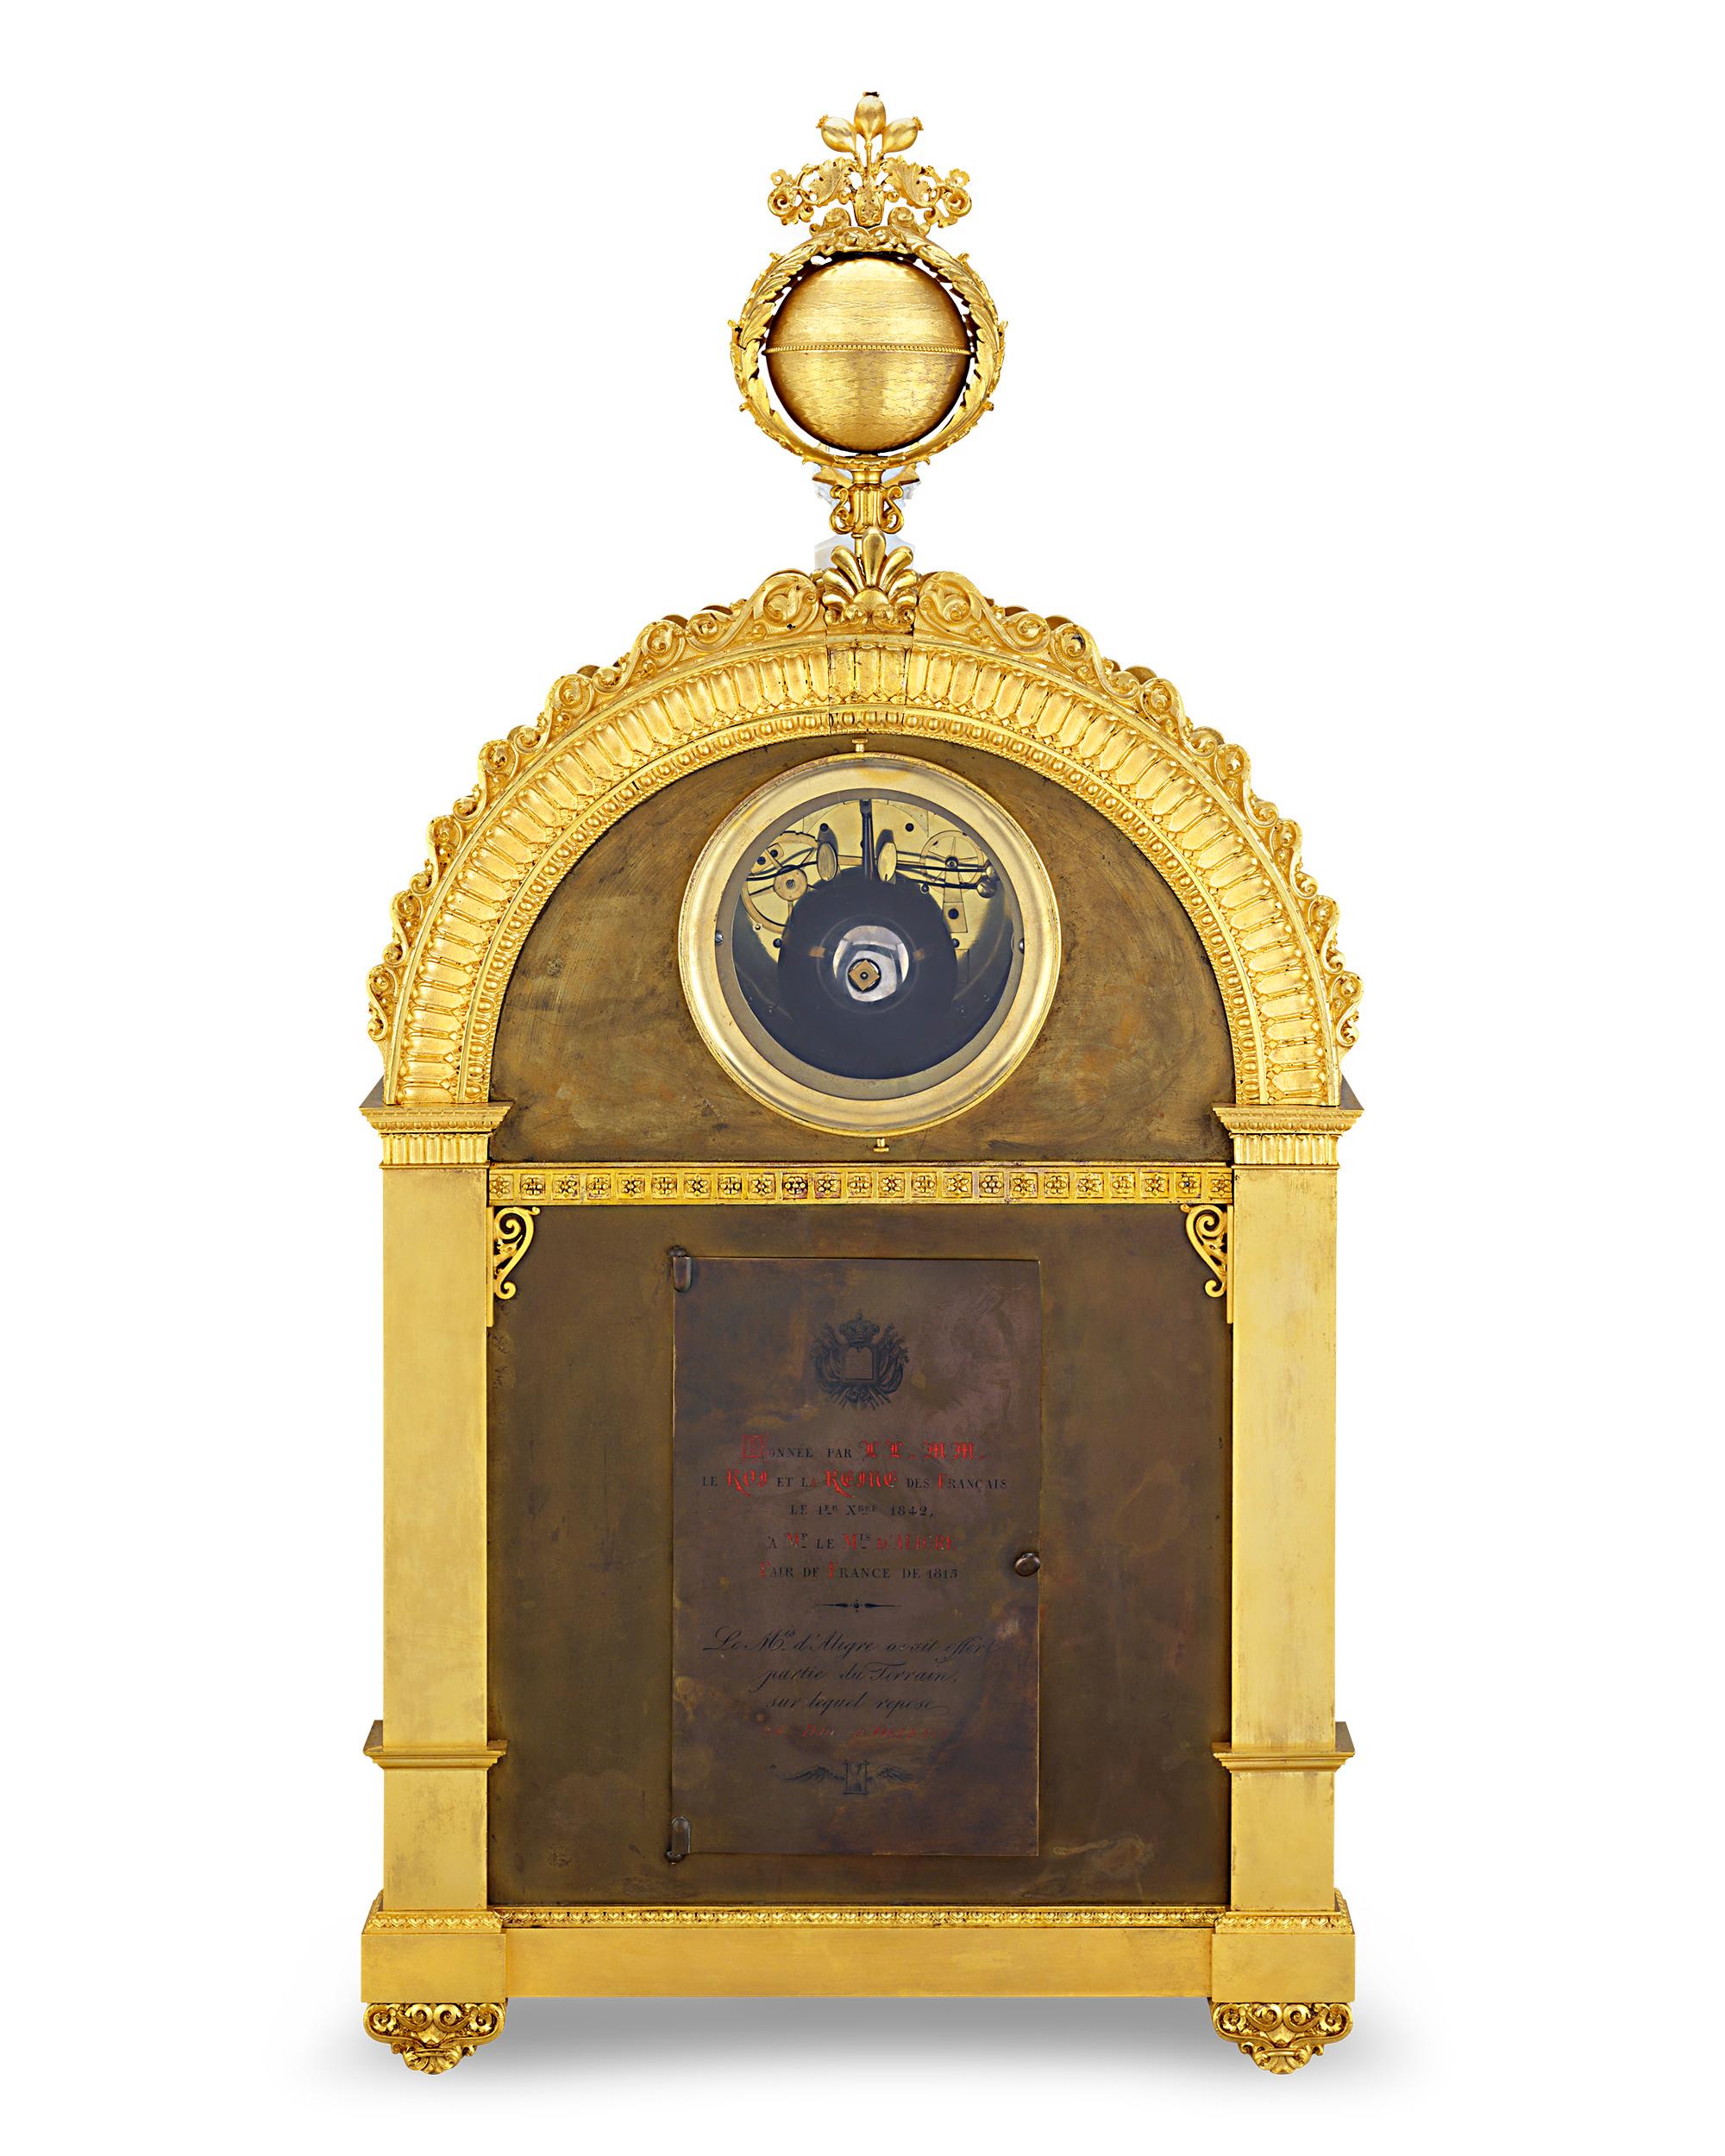 King Louis Philippe i of France's Large Mantel Clock with Sèvres Porcelain 1